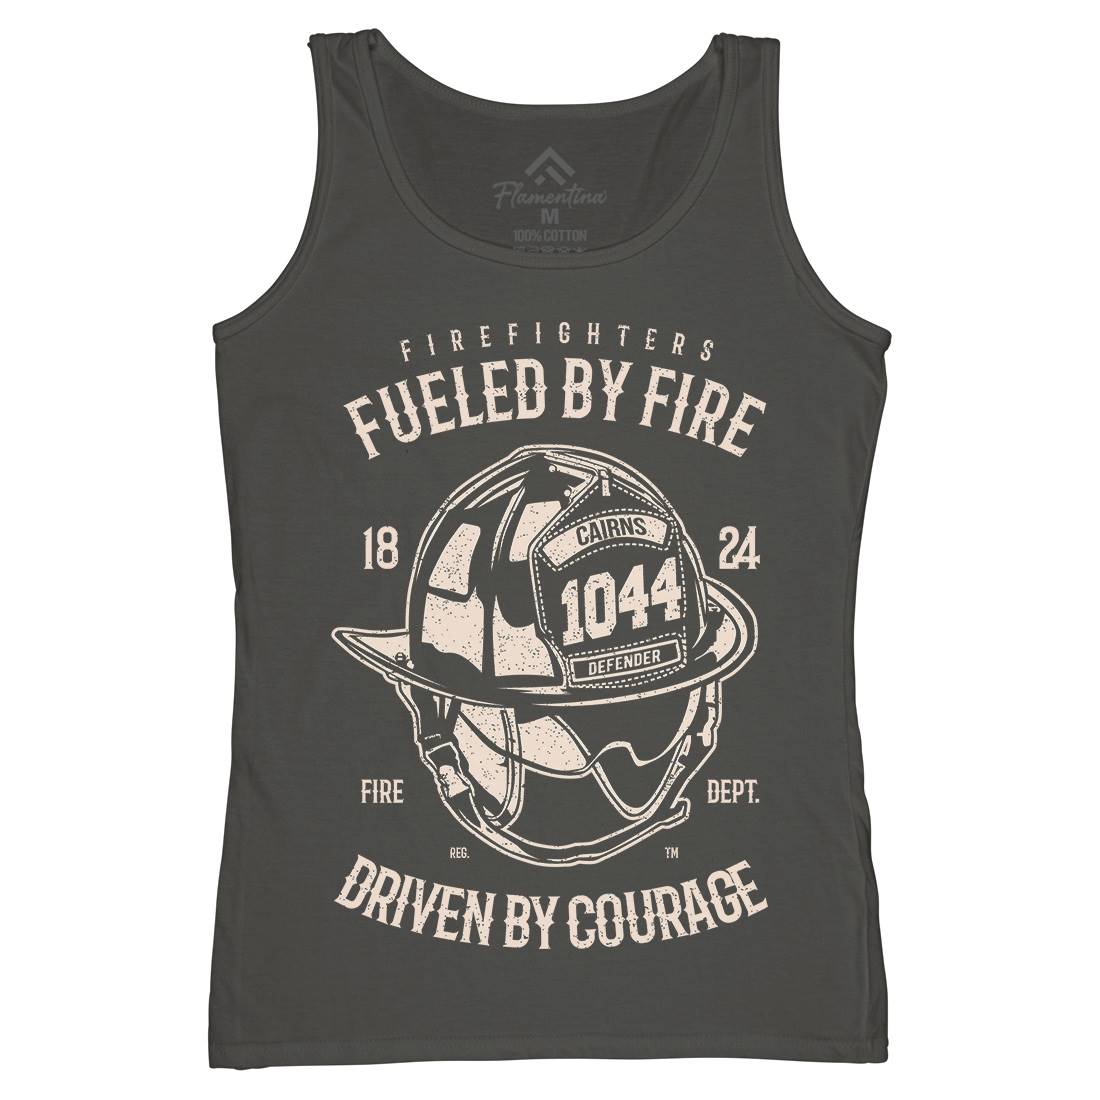 Fuelled By Fire Womens Organic Tank Top Vest Firefighters A667